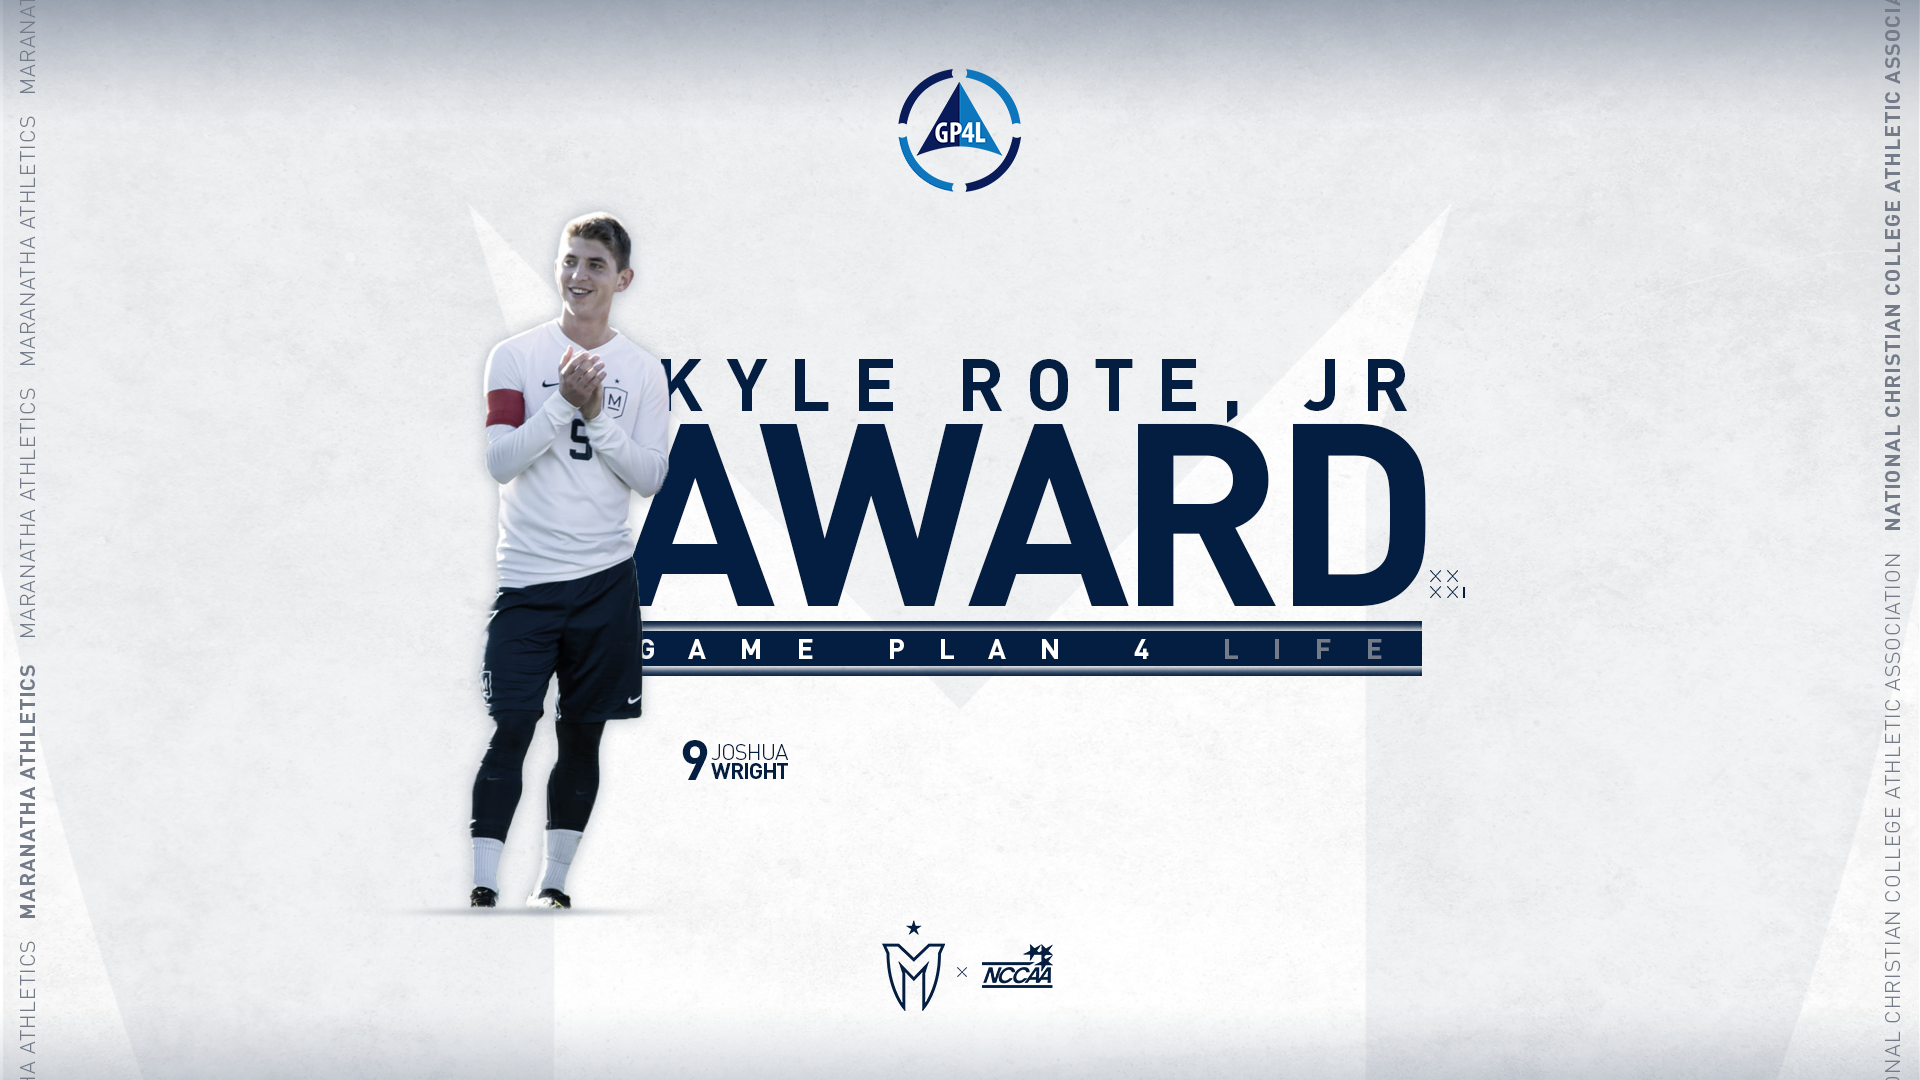 Wright Named Kyle Rote, Jr. Recipient